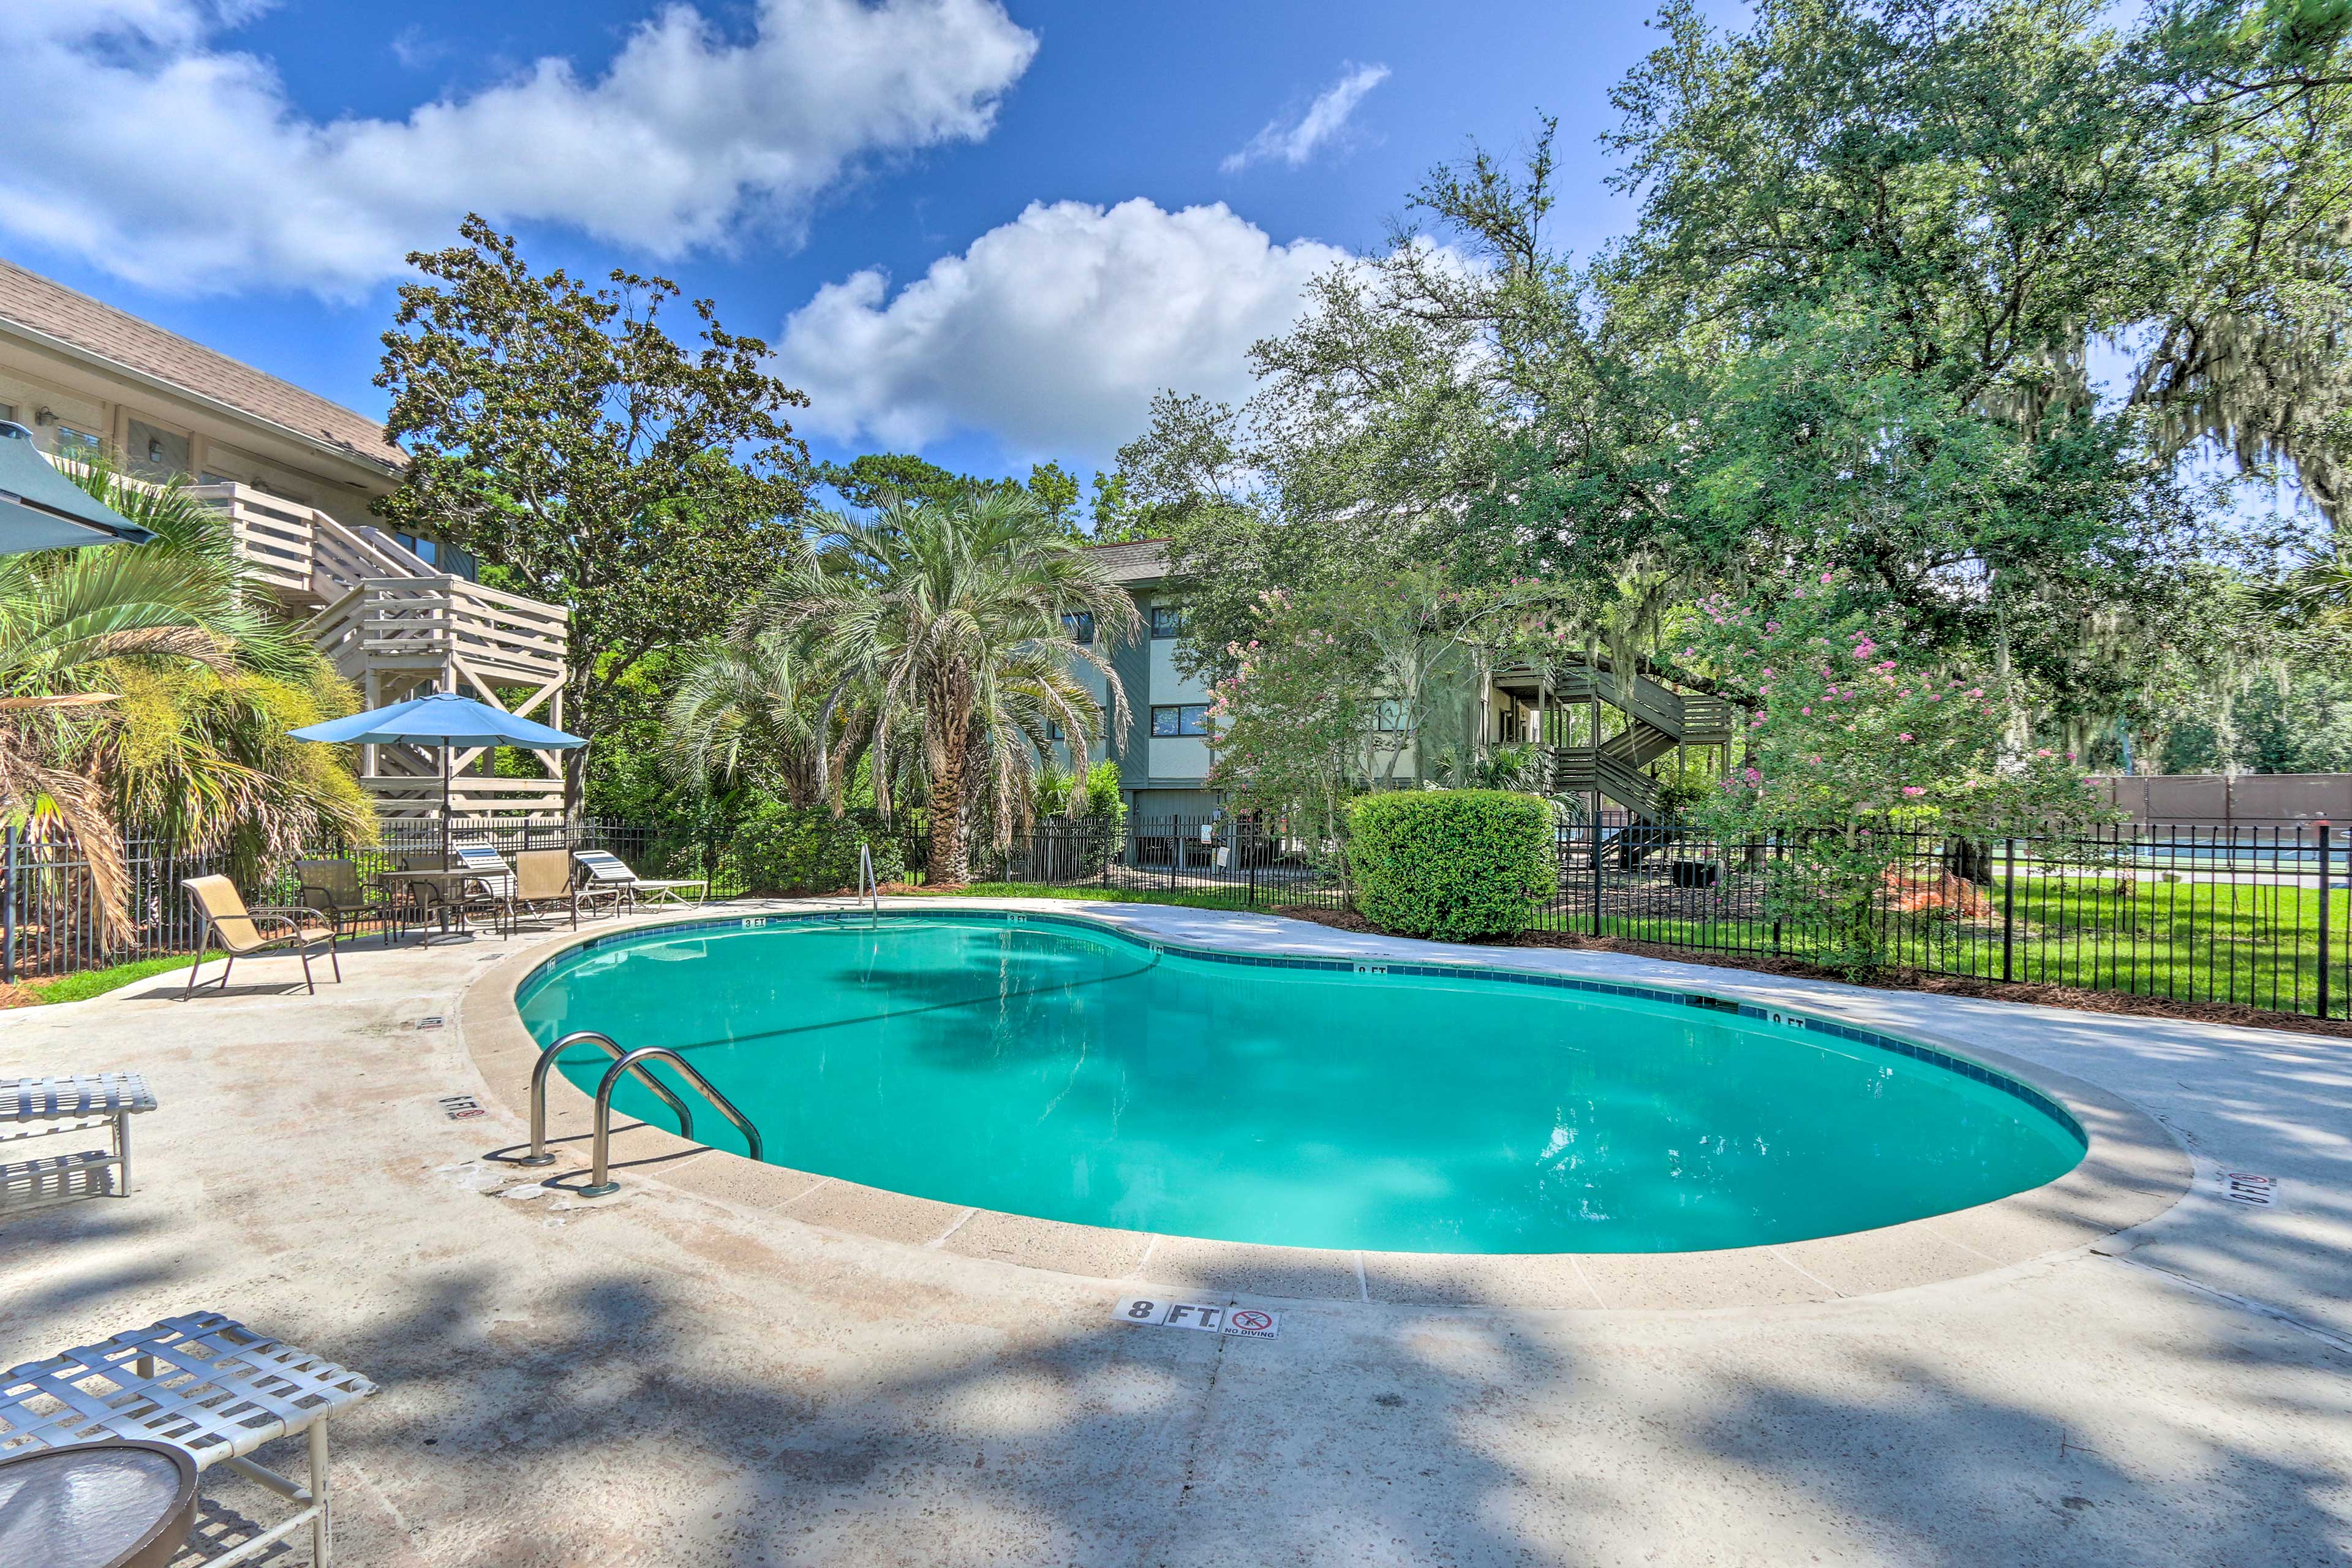 Hilton Head Island Vacation Rental | 2BR | 1.5BA | Stairs Required | 900 Sq Ft